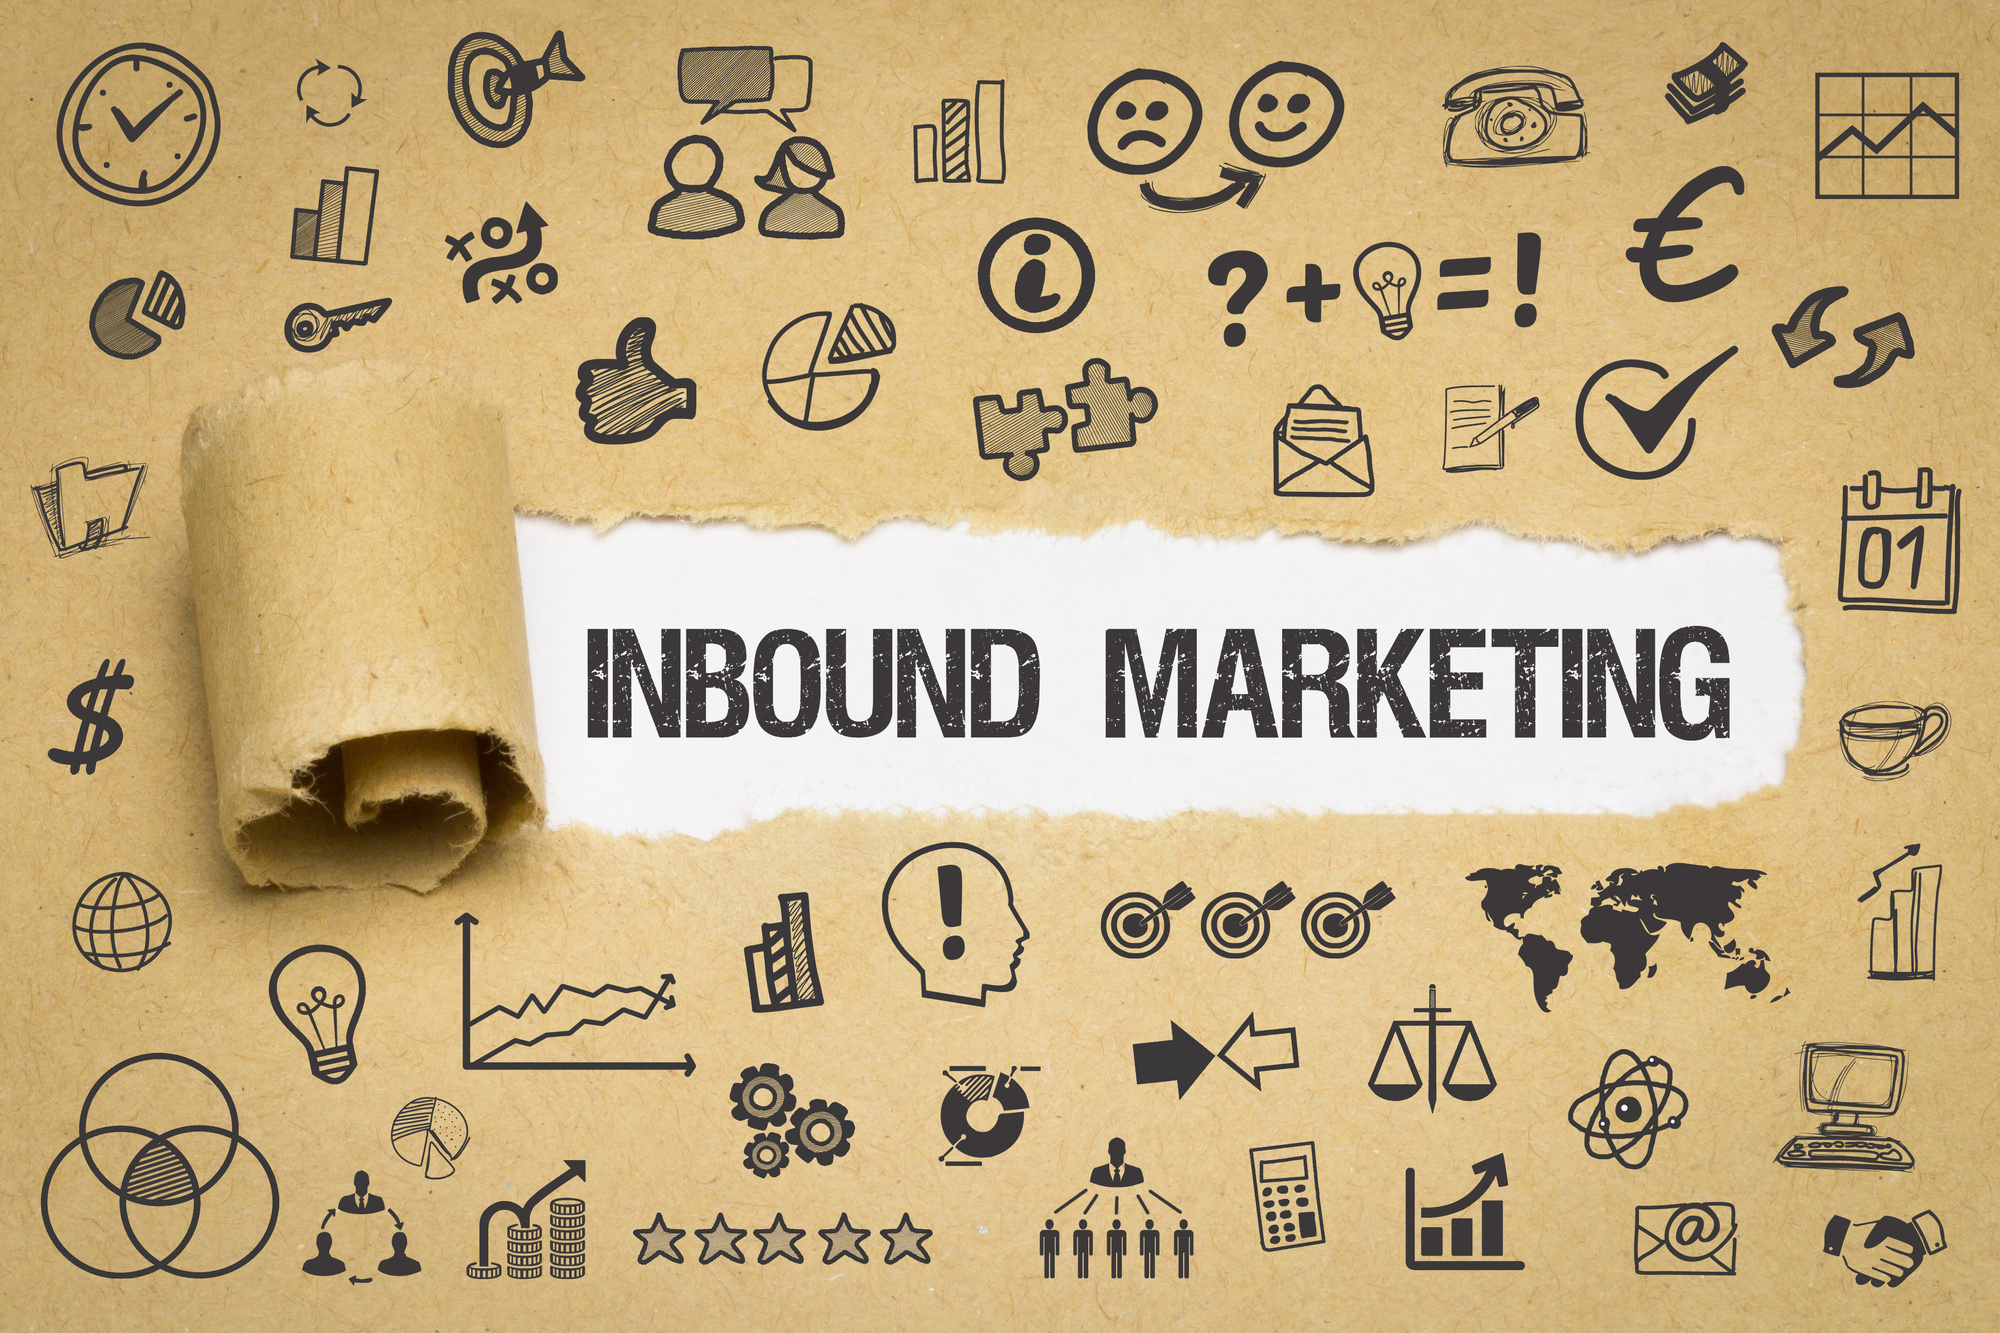 5 Inbound Marketing Strategies to Attract Quality Leads